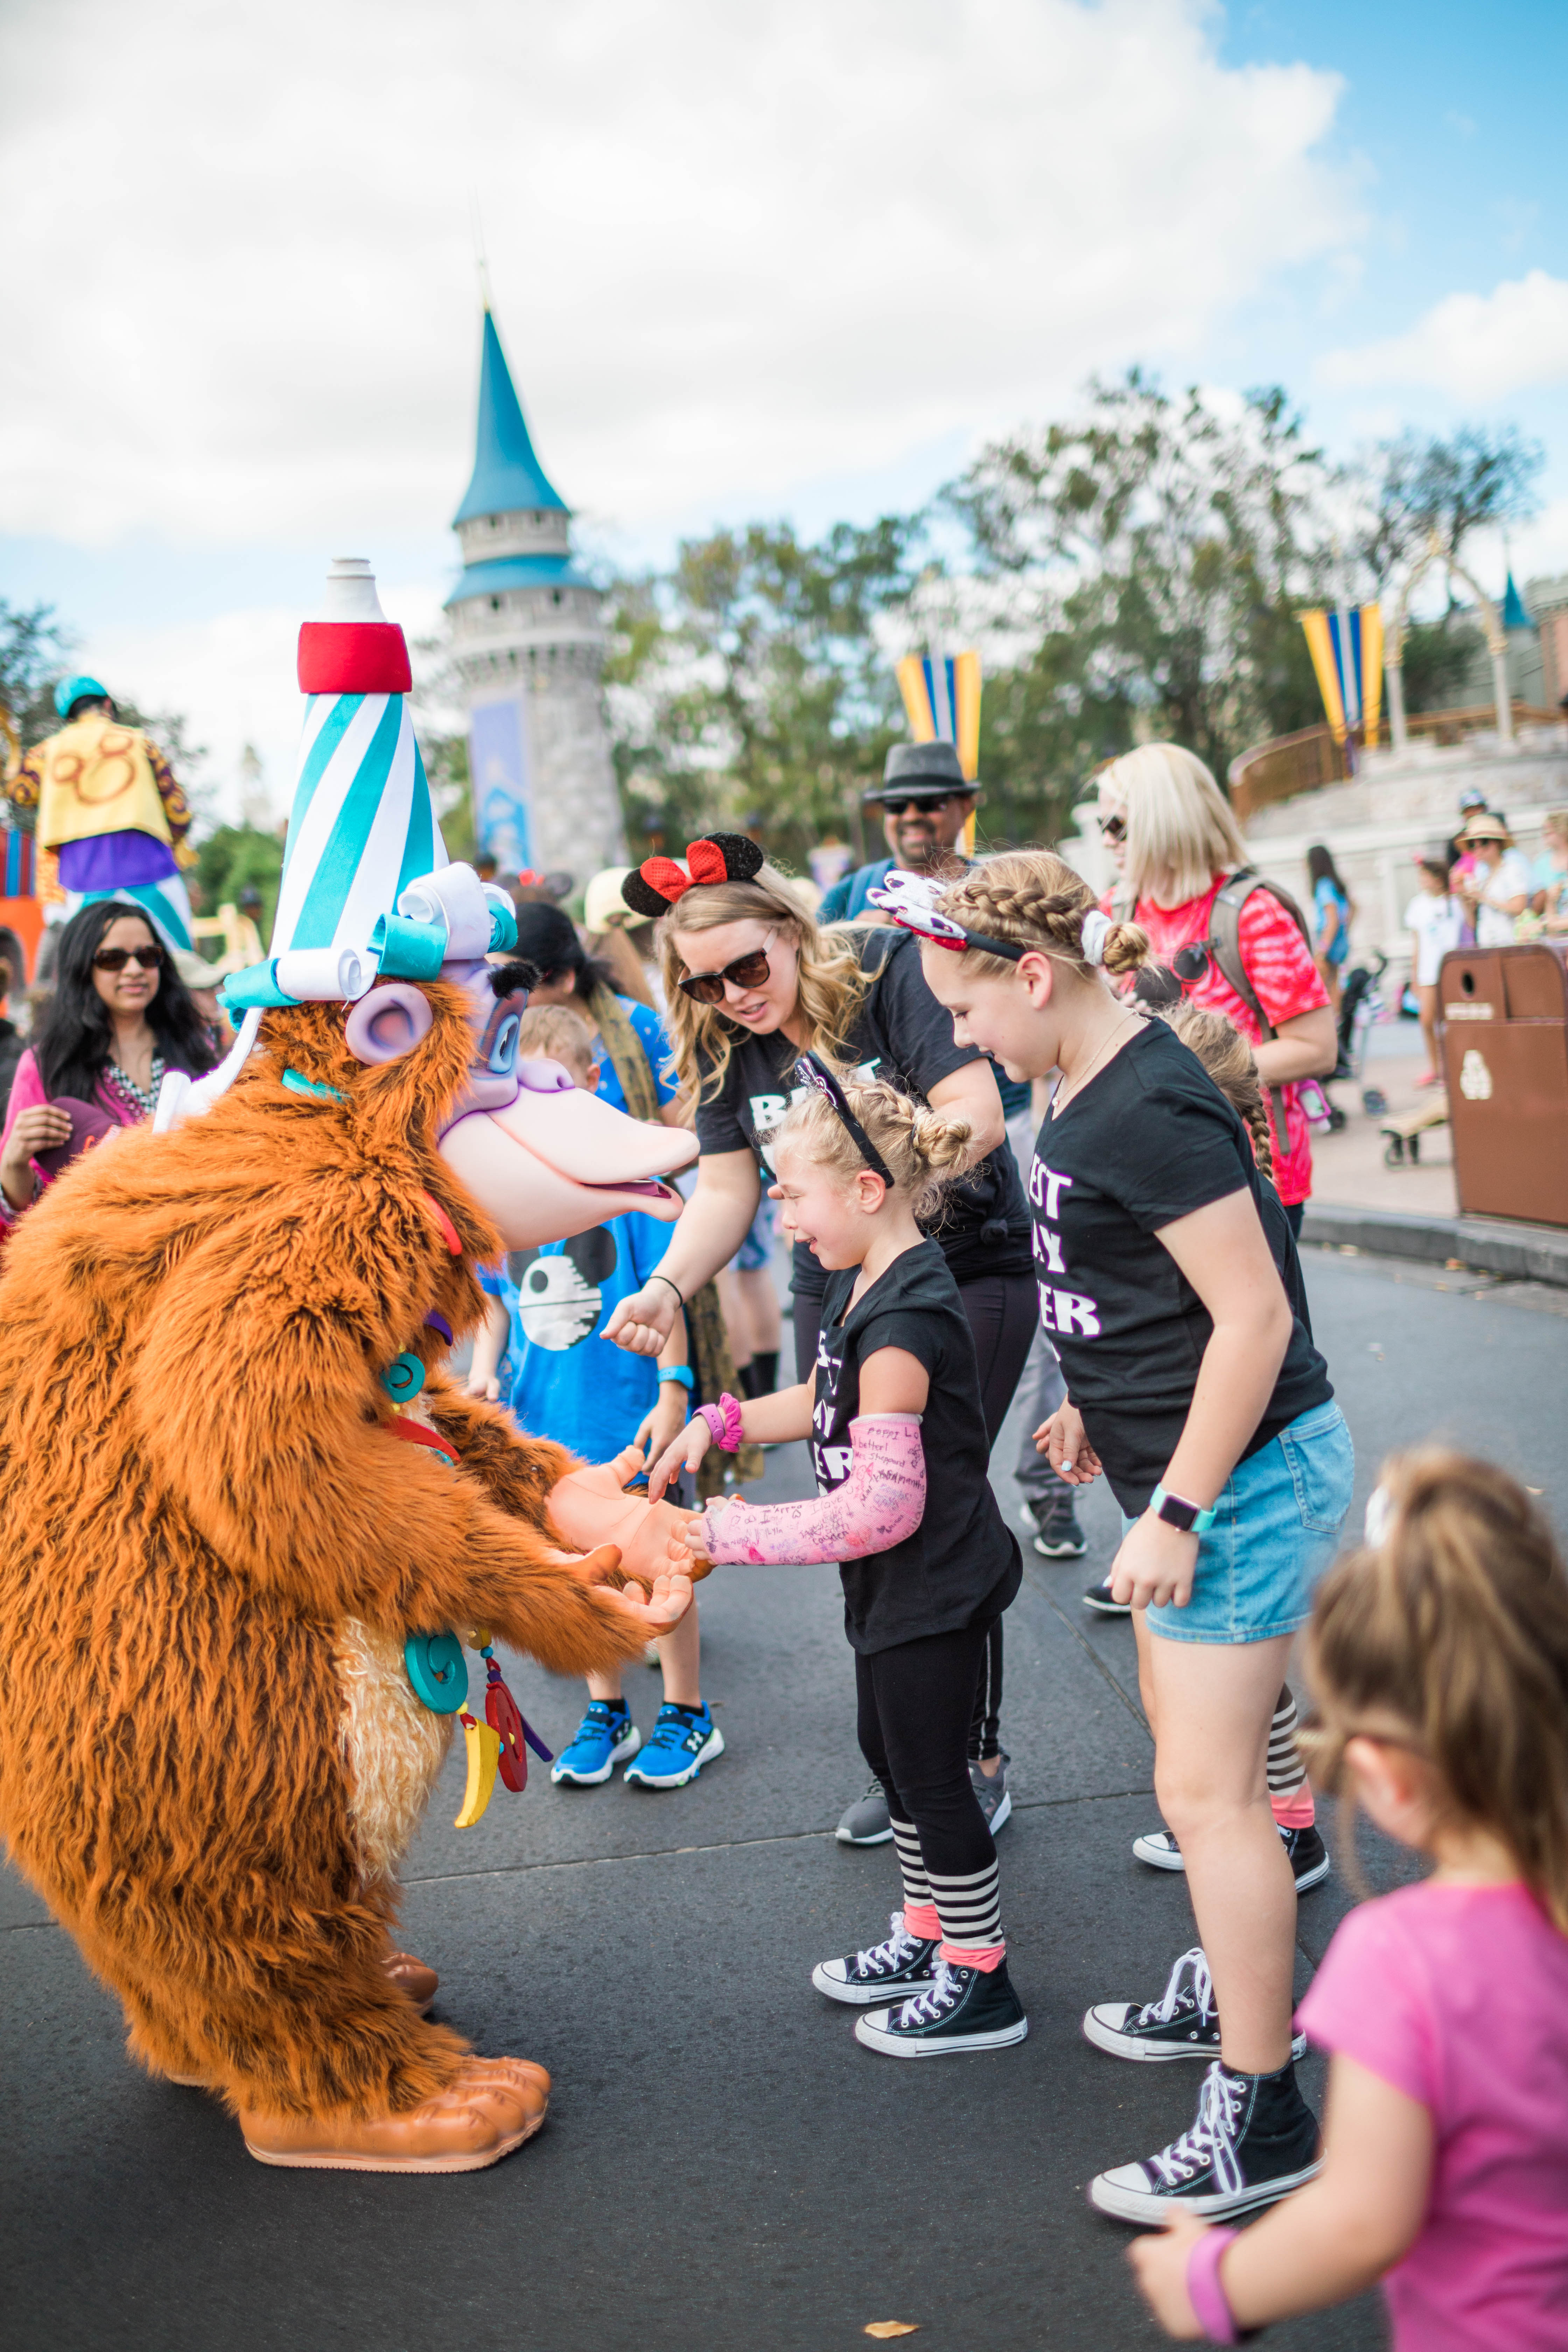 Kids, Mom and Characters dancing in the street at Disney World